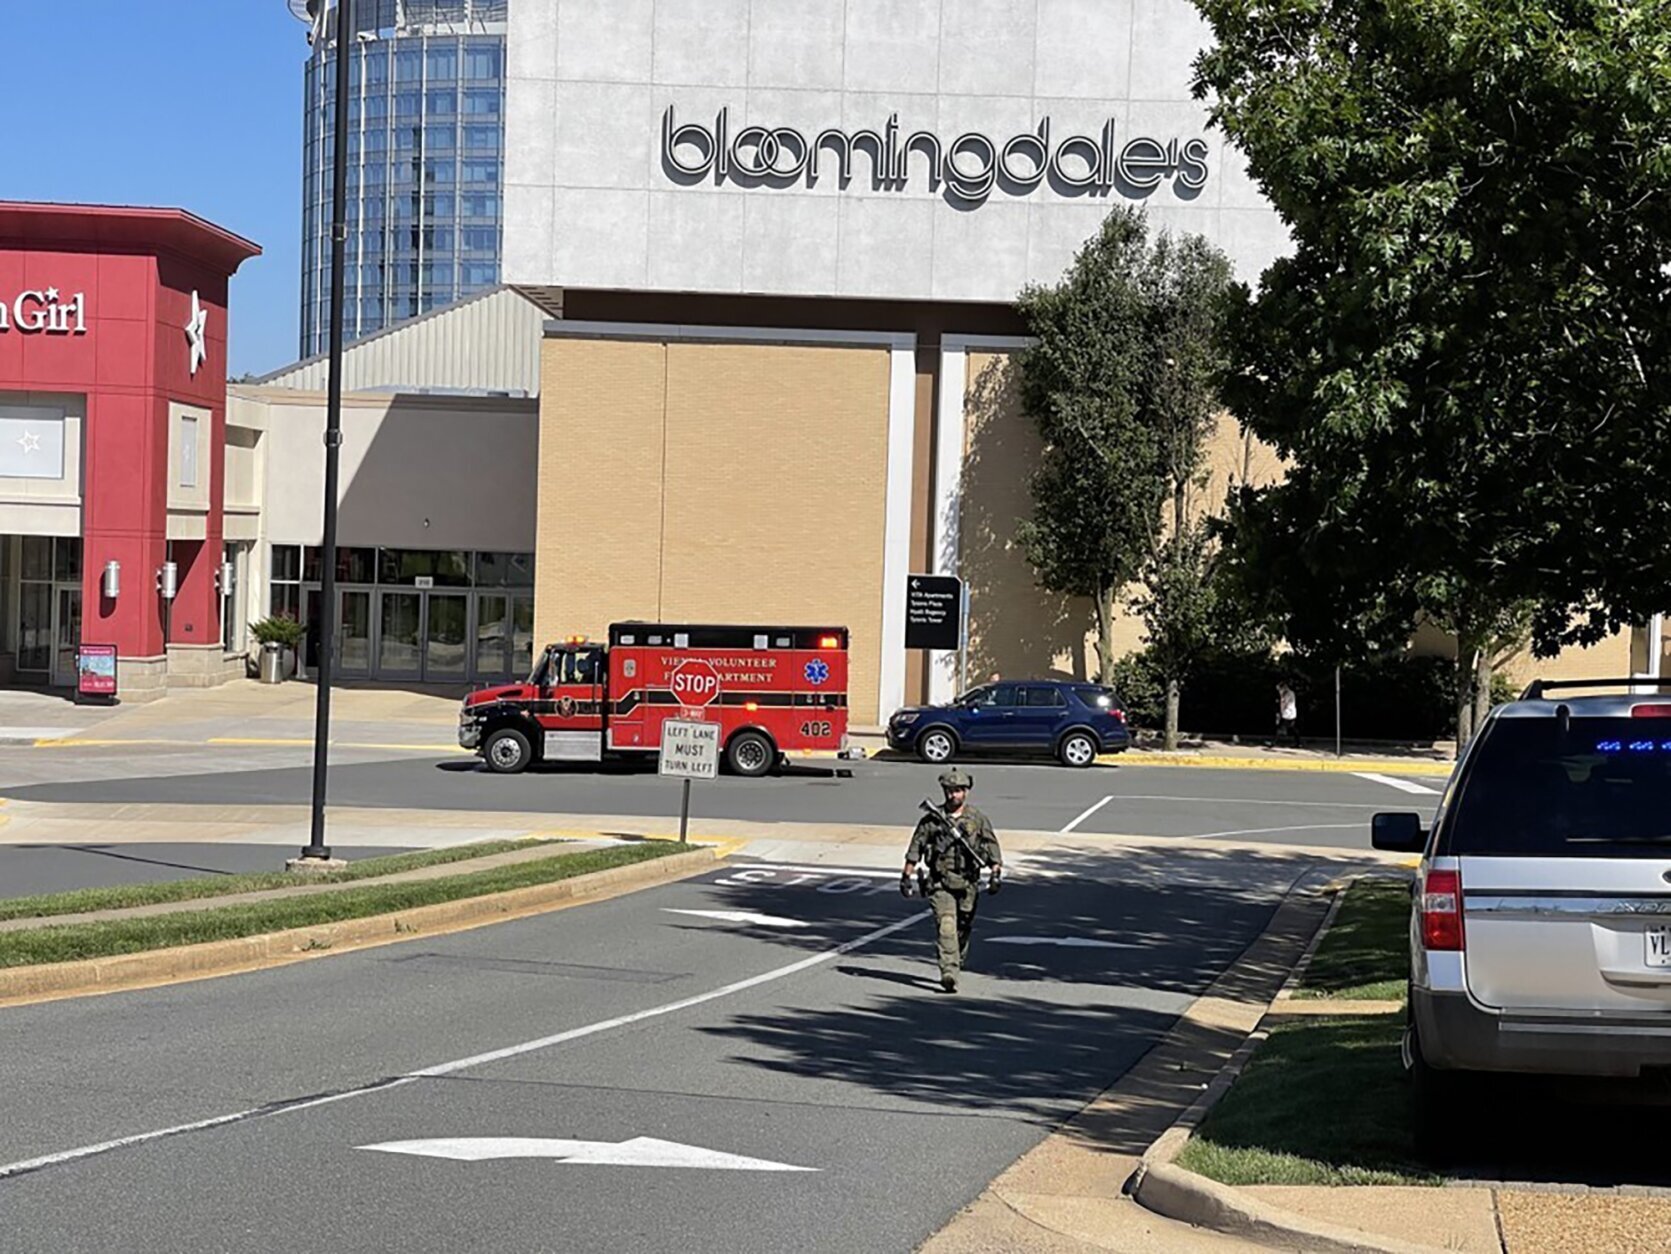 Law enforcement walks outside Tysons Corner Center mall in Tysons Corner, Va., Saturday, June 18, 2022. Authorities said a person fired a gun during a fight inside the mall. (Salwan Georges/The Washington Post via AP)